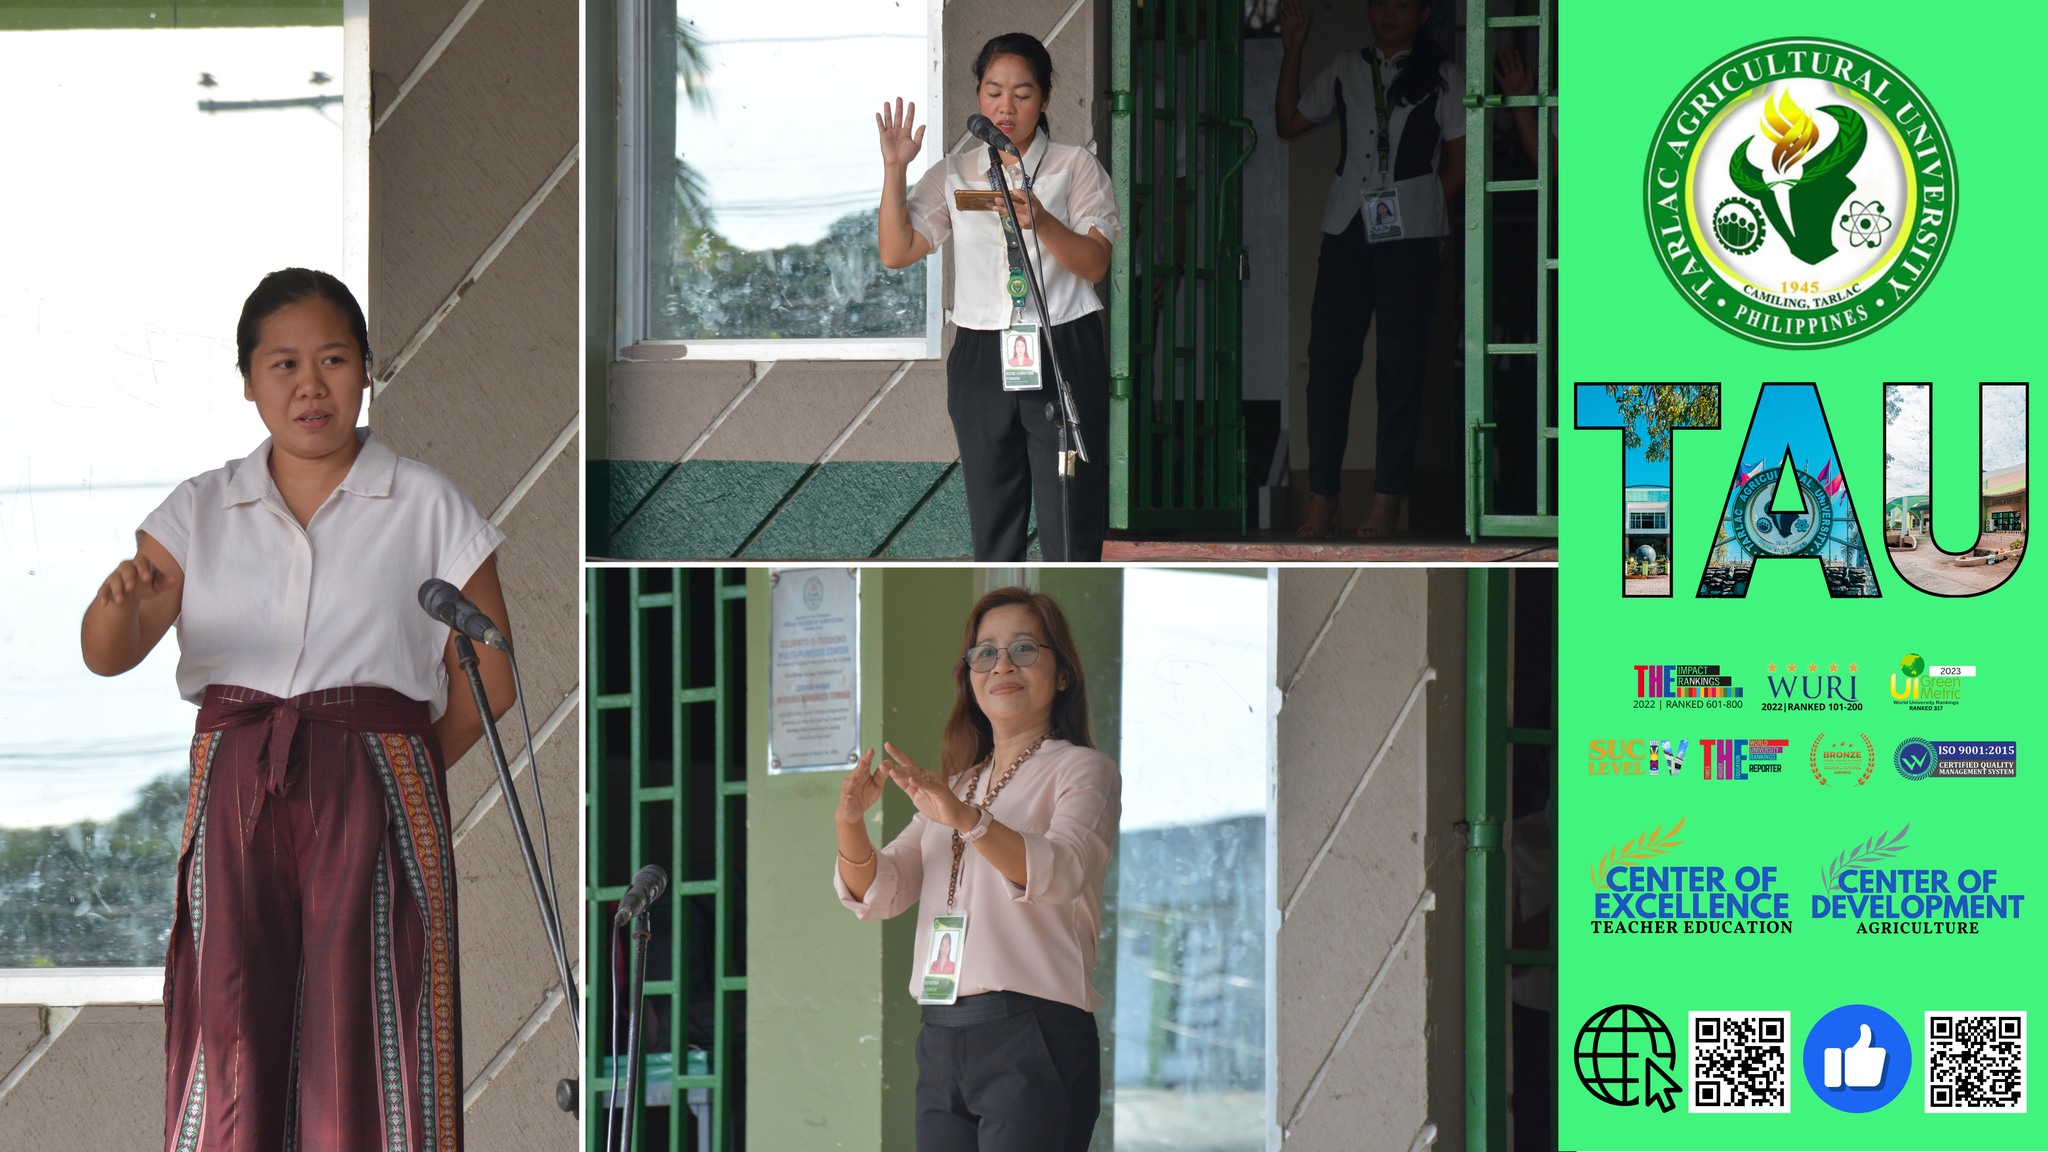 𝐂𝐀𝐏𝐓𝐔𝐑𝐄𝐃 𝐈𝐍 𝐋𝐄𝐍𝐒 | Leading the flag-raising ceremony on 15 July is the Department of Extension and Training (DET) team, headed by its OIC Director Dr. Agnes C. Perey and Assistant Director Ms. Myrje J. Patricio.